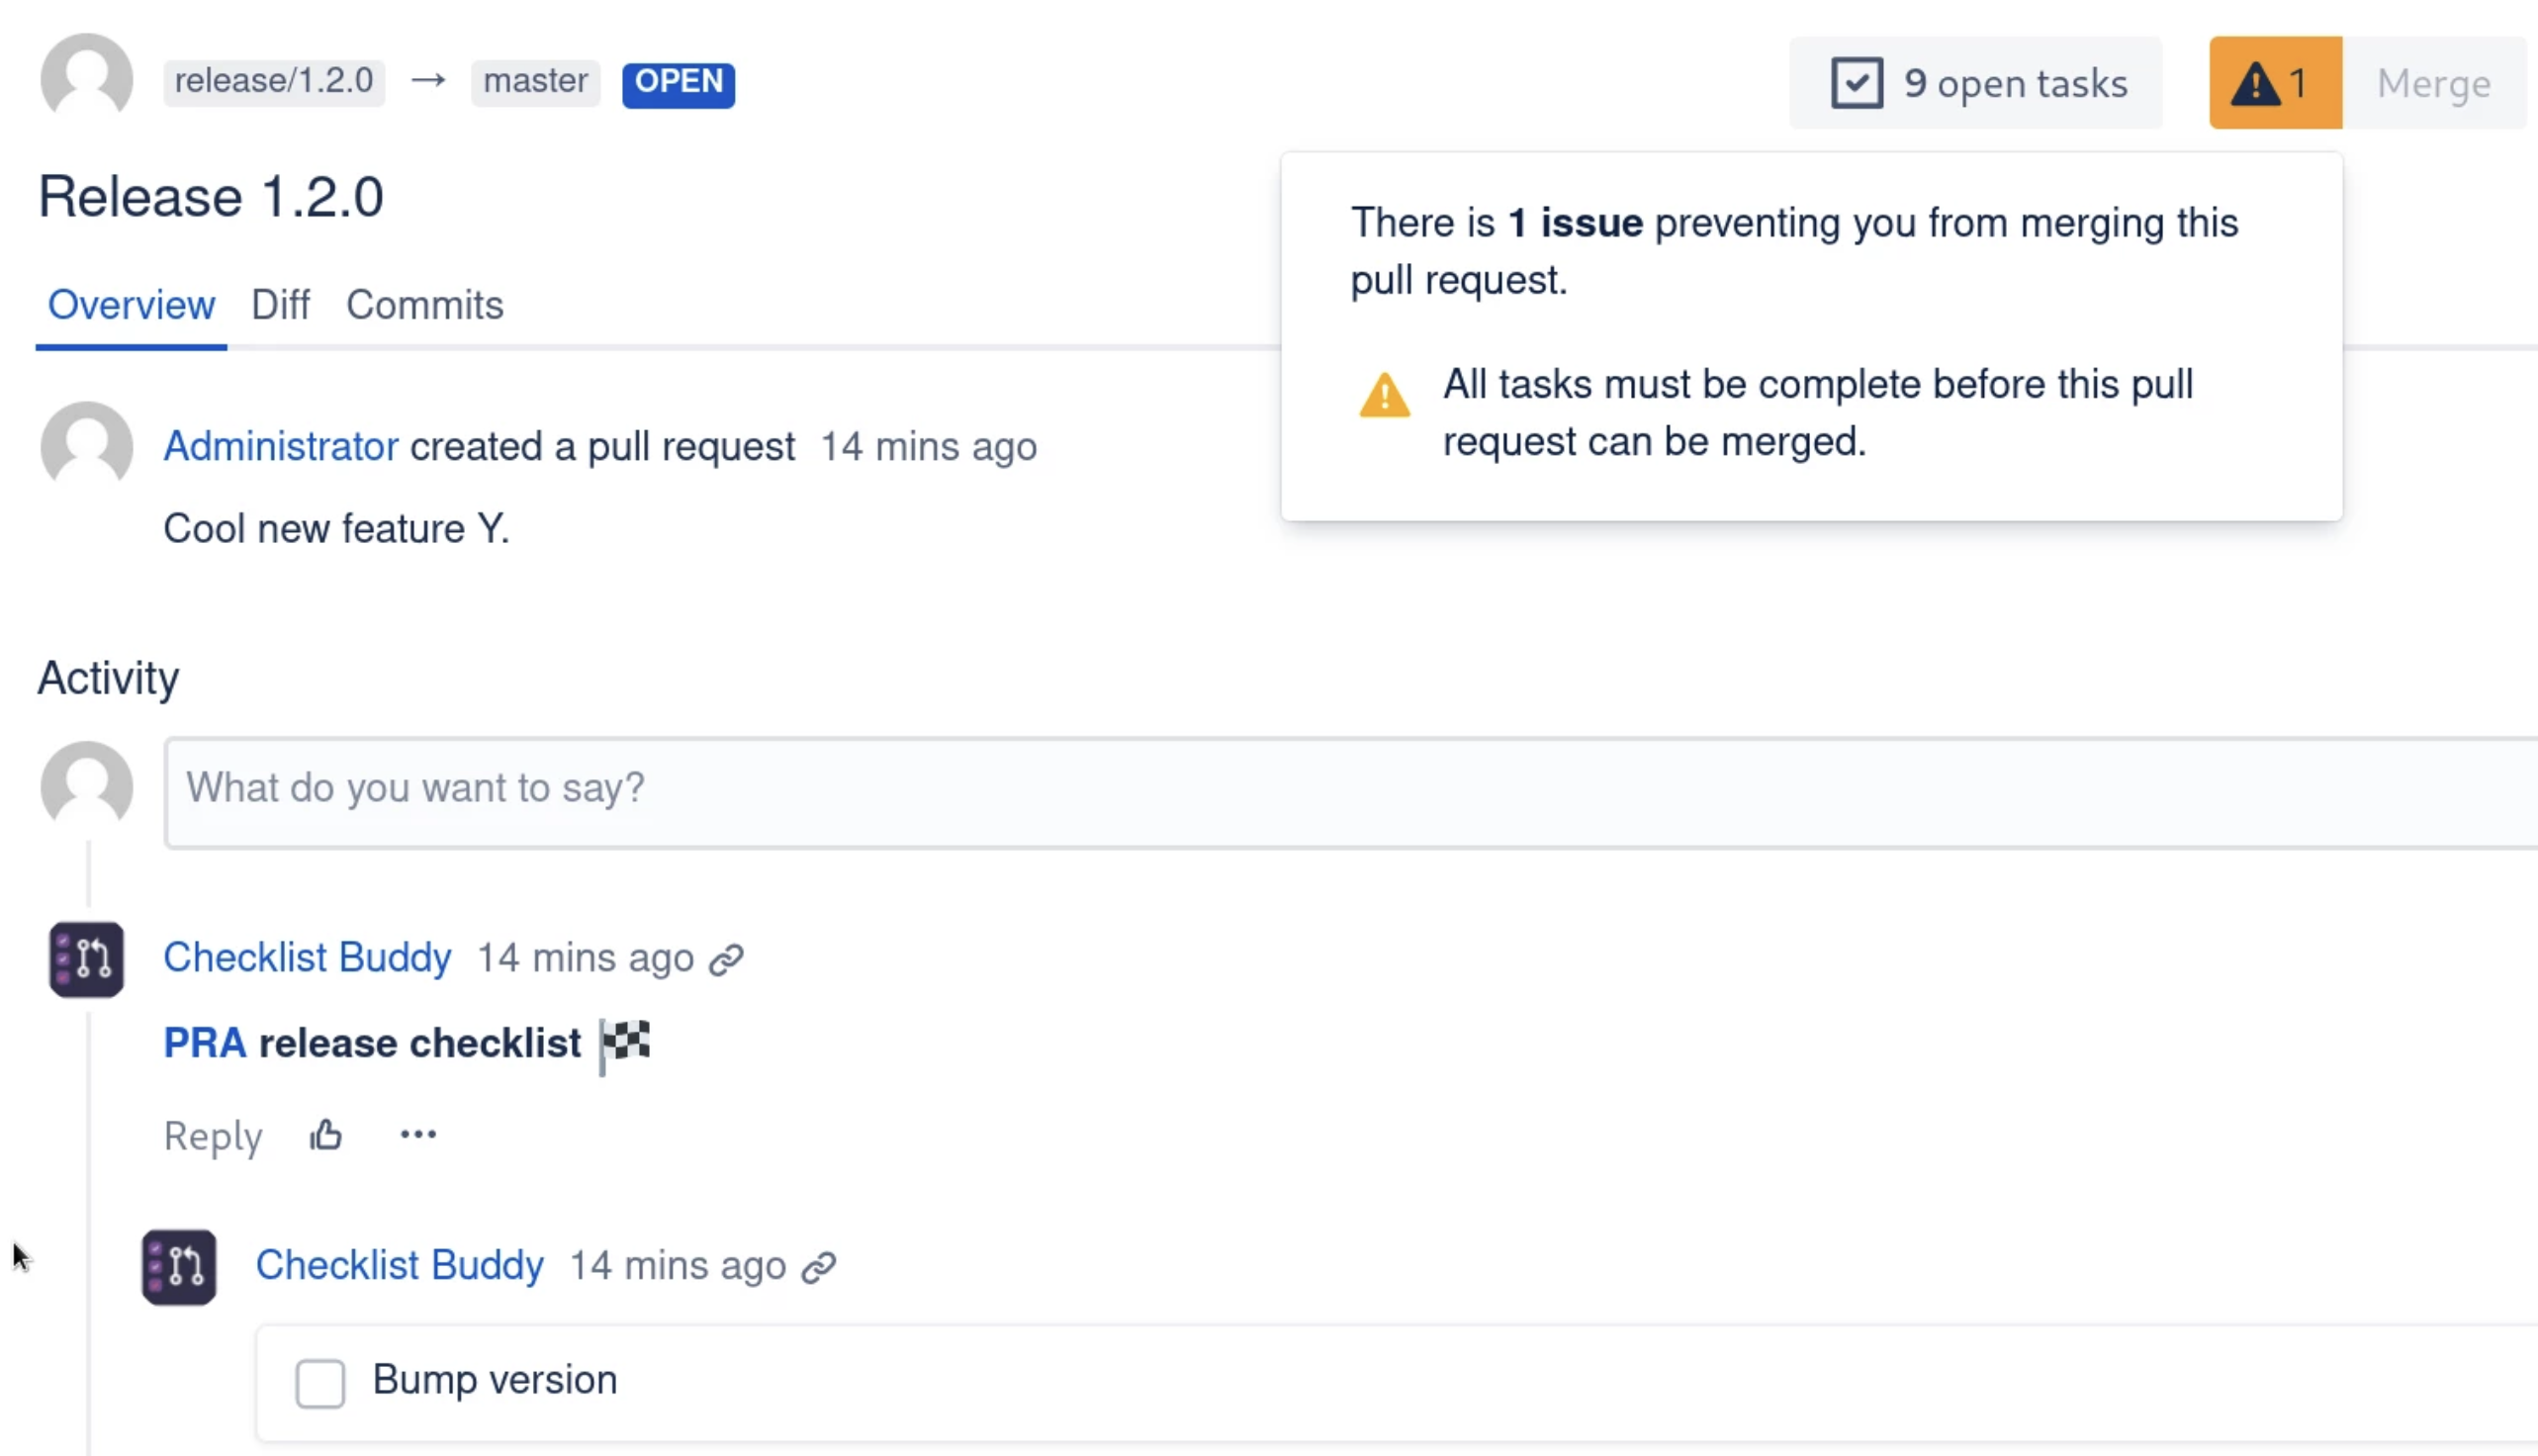 Enforce pull request compliance with merge checks